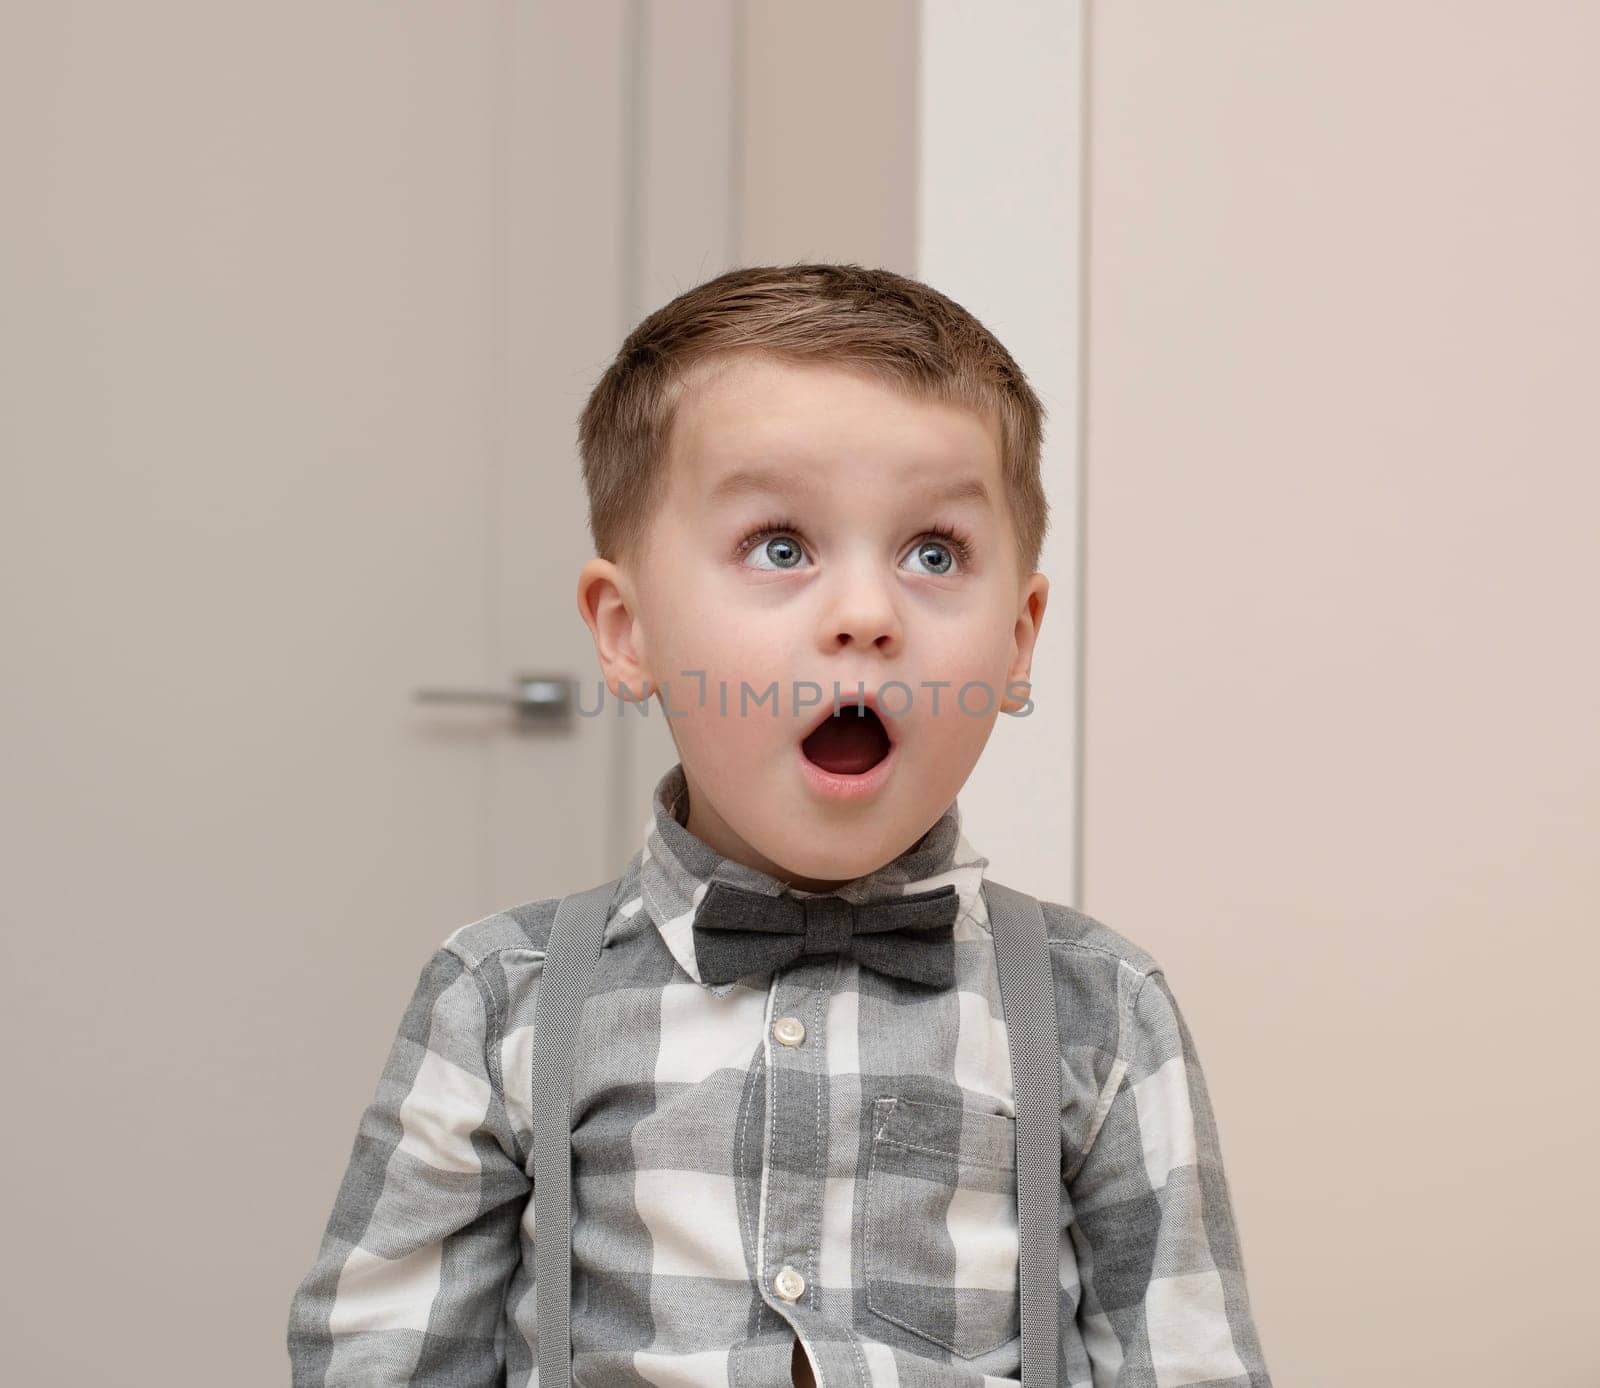 Emotions of surprise and delight on the child s face. A small handsome boy of 4 years old in a shirt with a bow tie shows a grimace with an expression on his face. Close-up. portrait